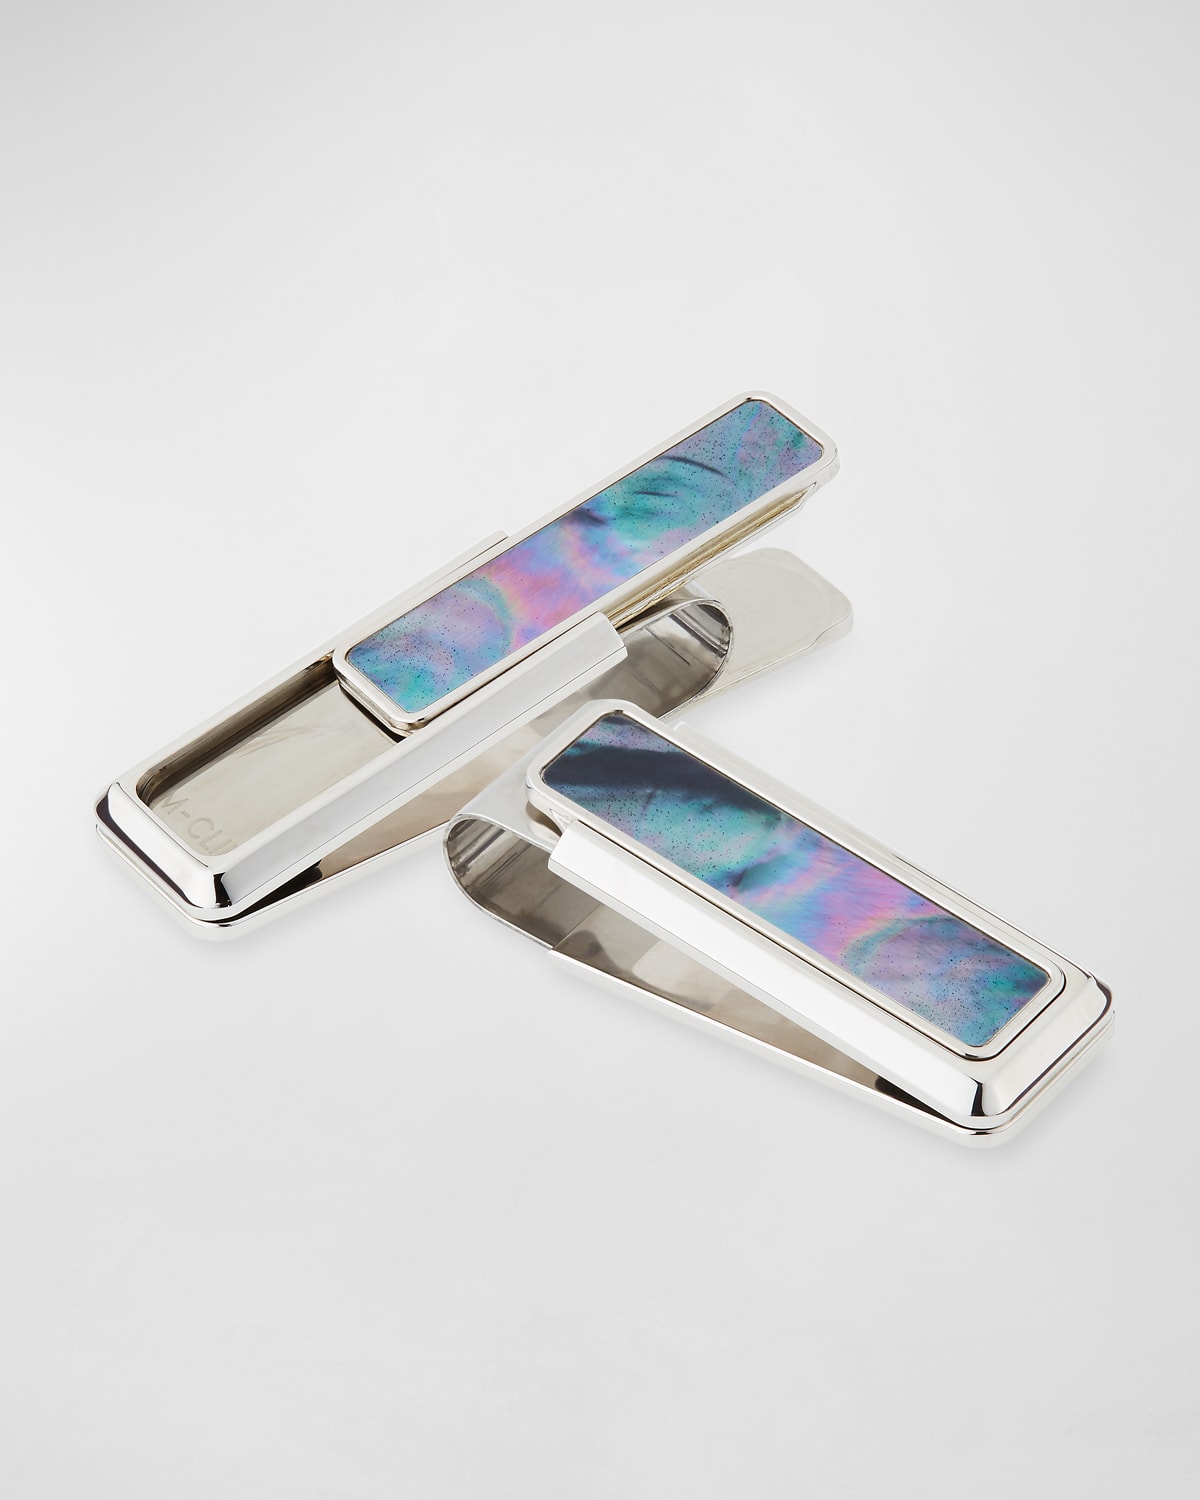 M Clip Mother-of-Pearl Stainless Steel Money Clip